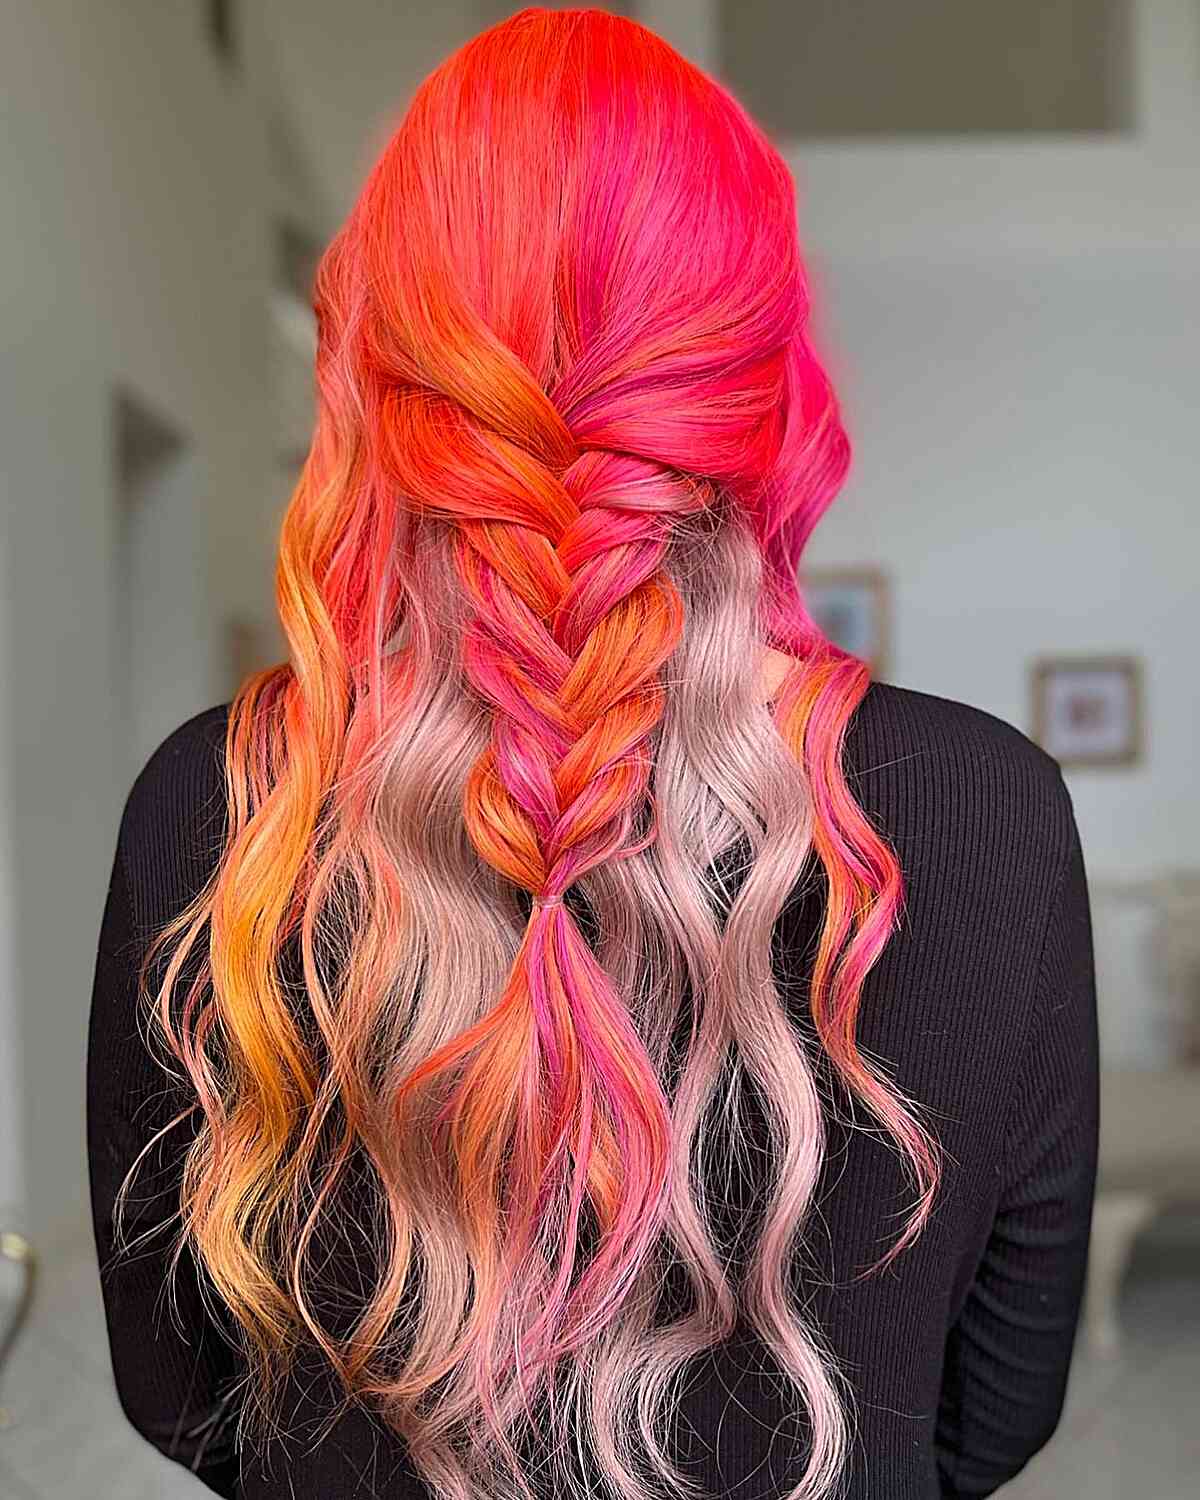 Sunset Mermaid Hair with Long Waves for Rave Festivals